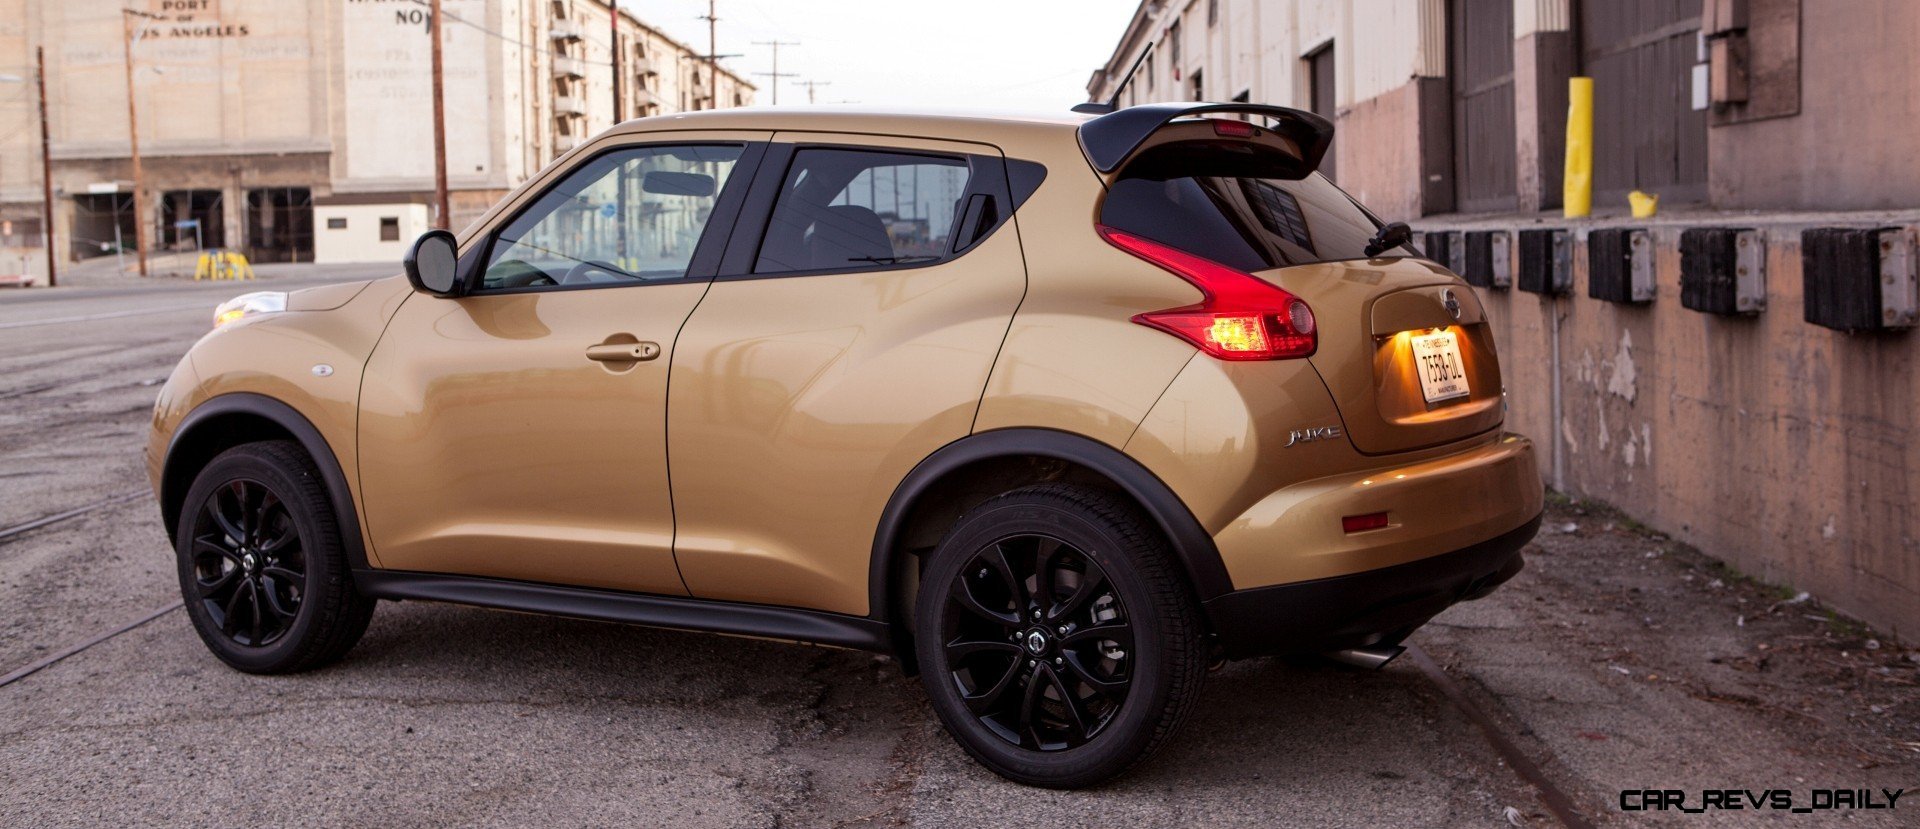 188hp Turbo Standard 2014 Nissan Juke Midnight Edition 6 Sp Manual Fwd From 19 000 Awd Auto From 21 000 Car Revs Daily Com